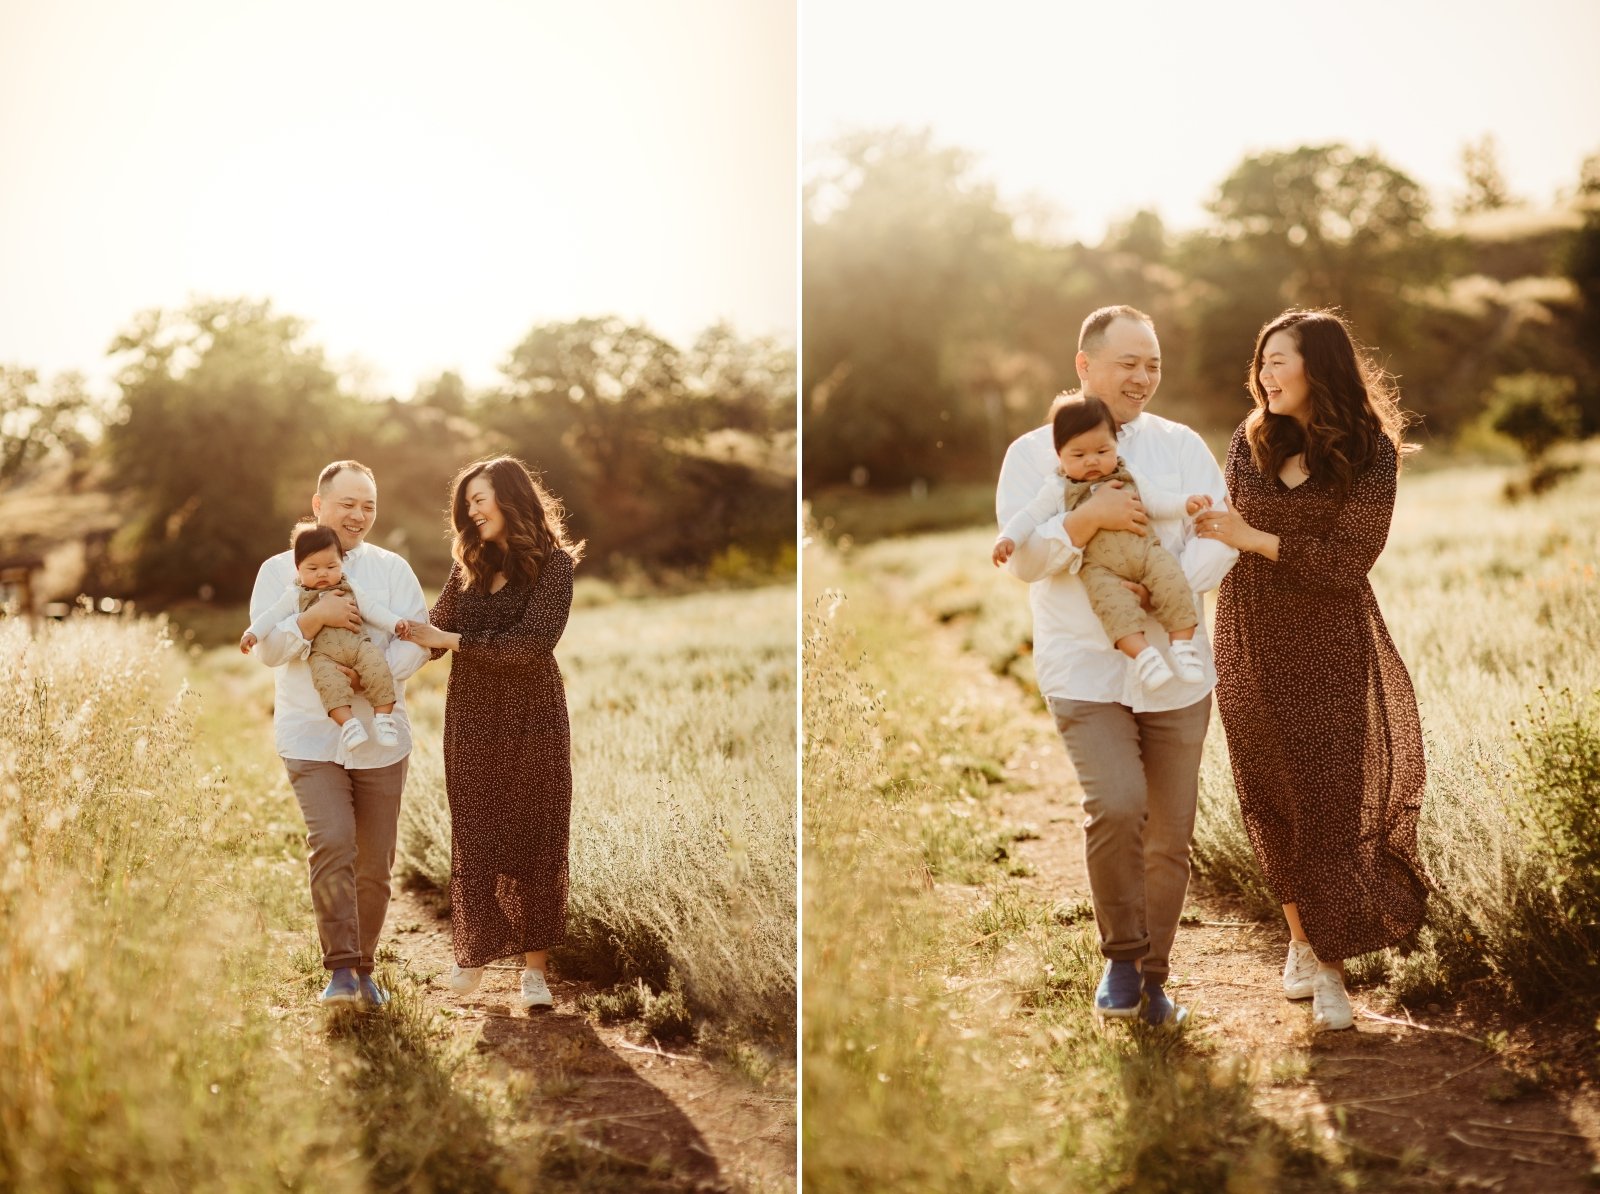 EAST BAY AREA FAMILY PHOTOGRAPHY SHELL RIDGE OPEN SPACE BABY LIFESTYLE PHOTOSHOOT  6.jpg